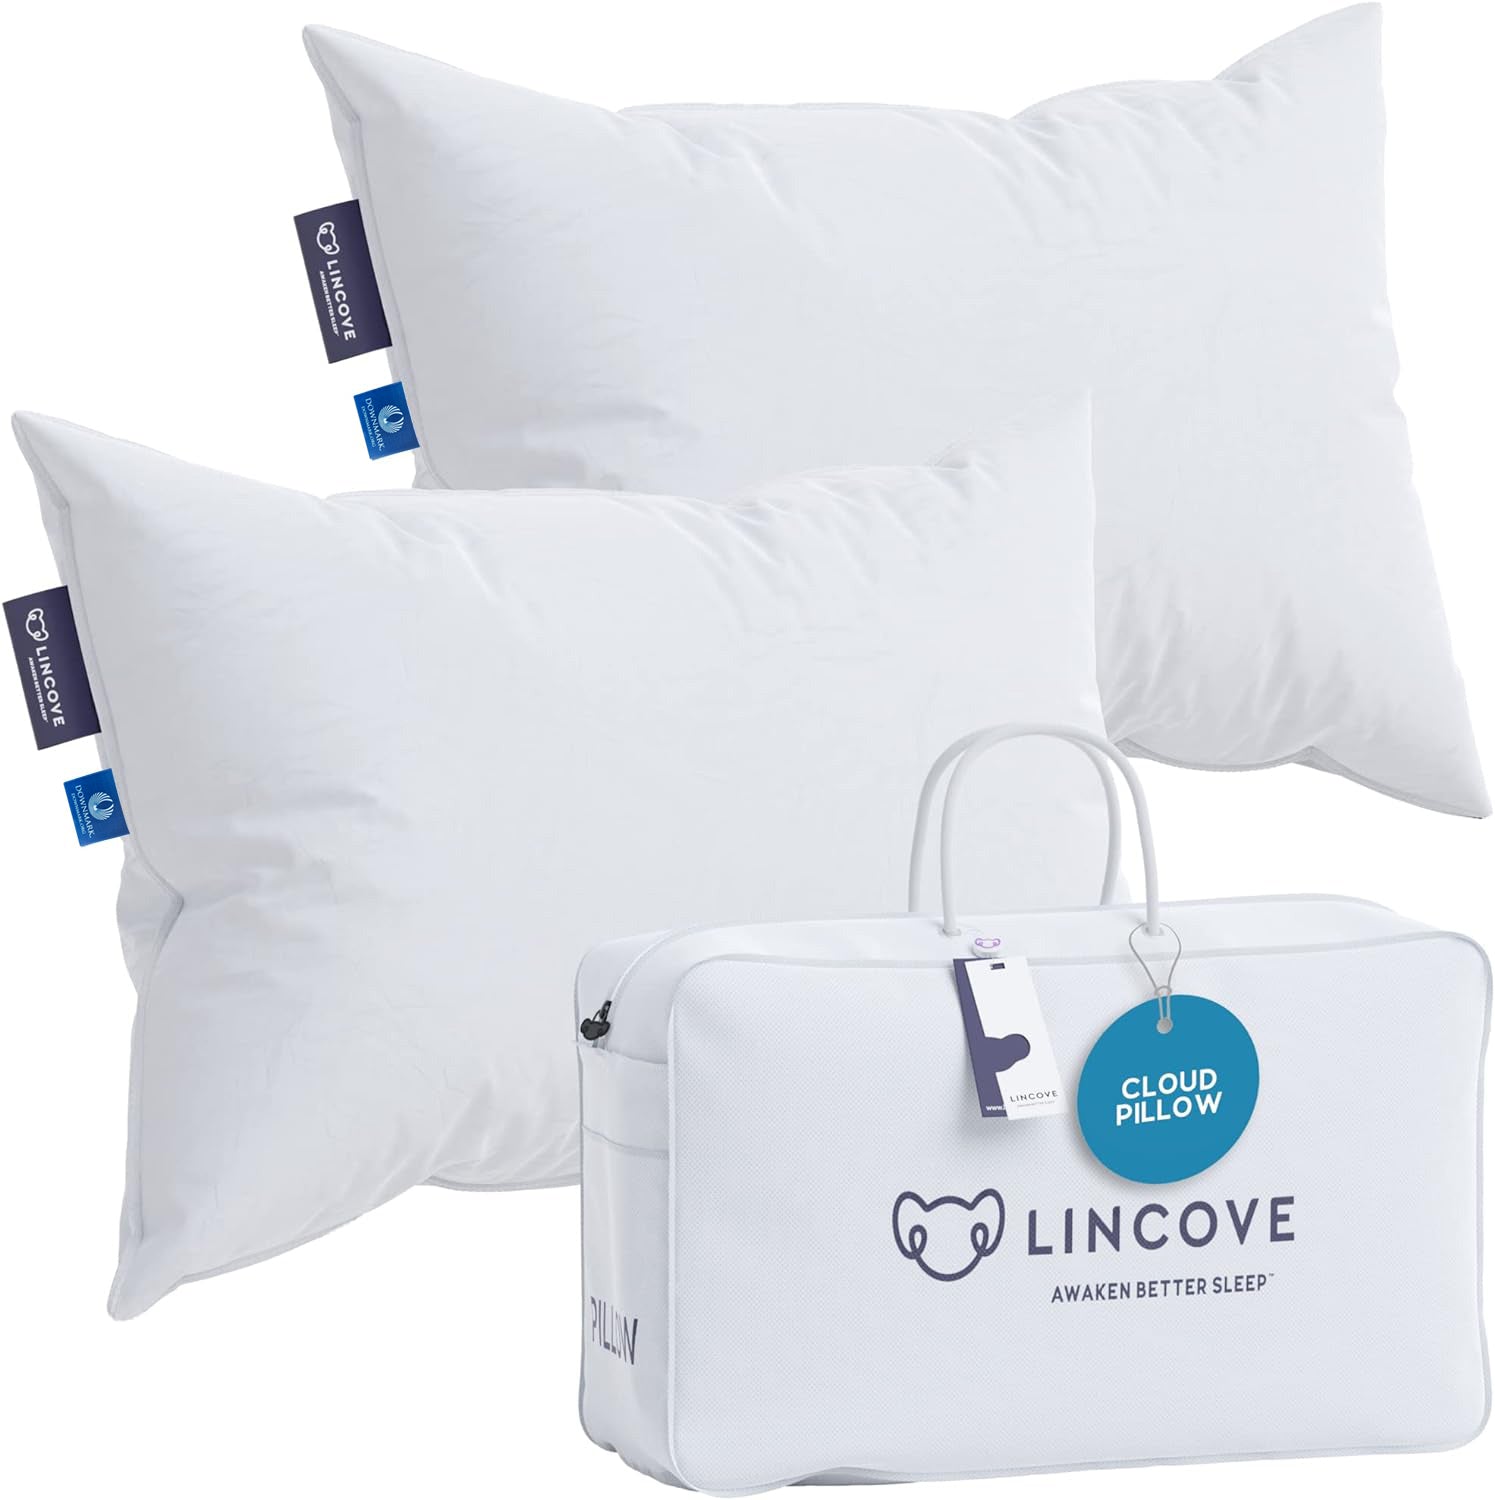 Lincove Cloud Canadian Down Luxury Sleeping Pillow - 625 Fill Power, 500 Thread Count Cotton Sateen Shell, Standard - Soft, 2 Pack